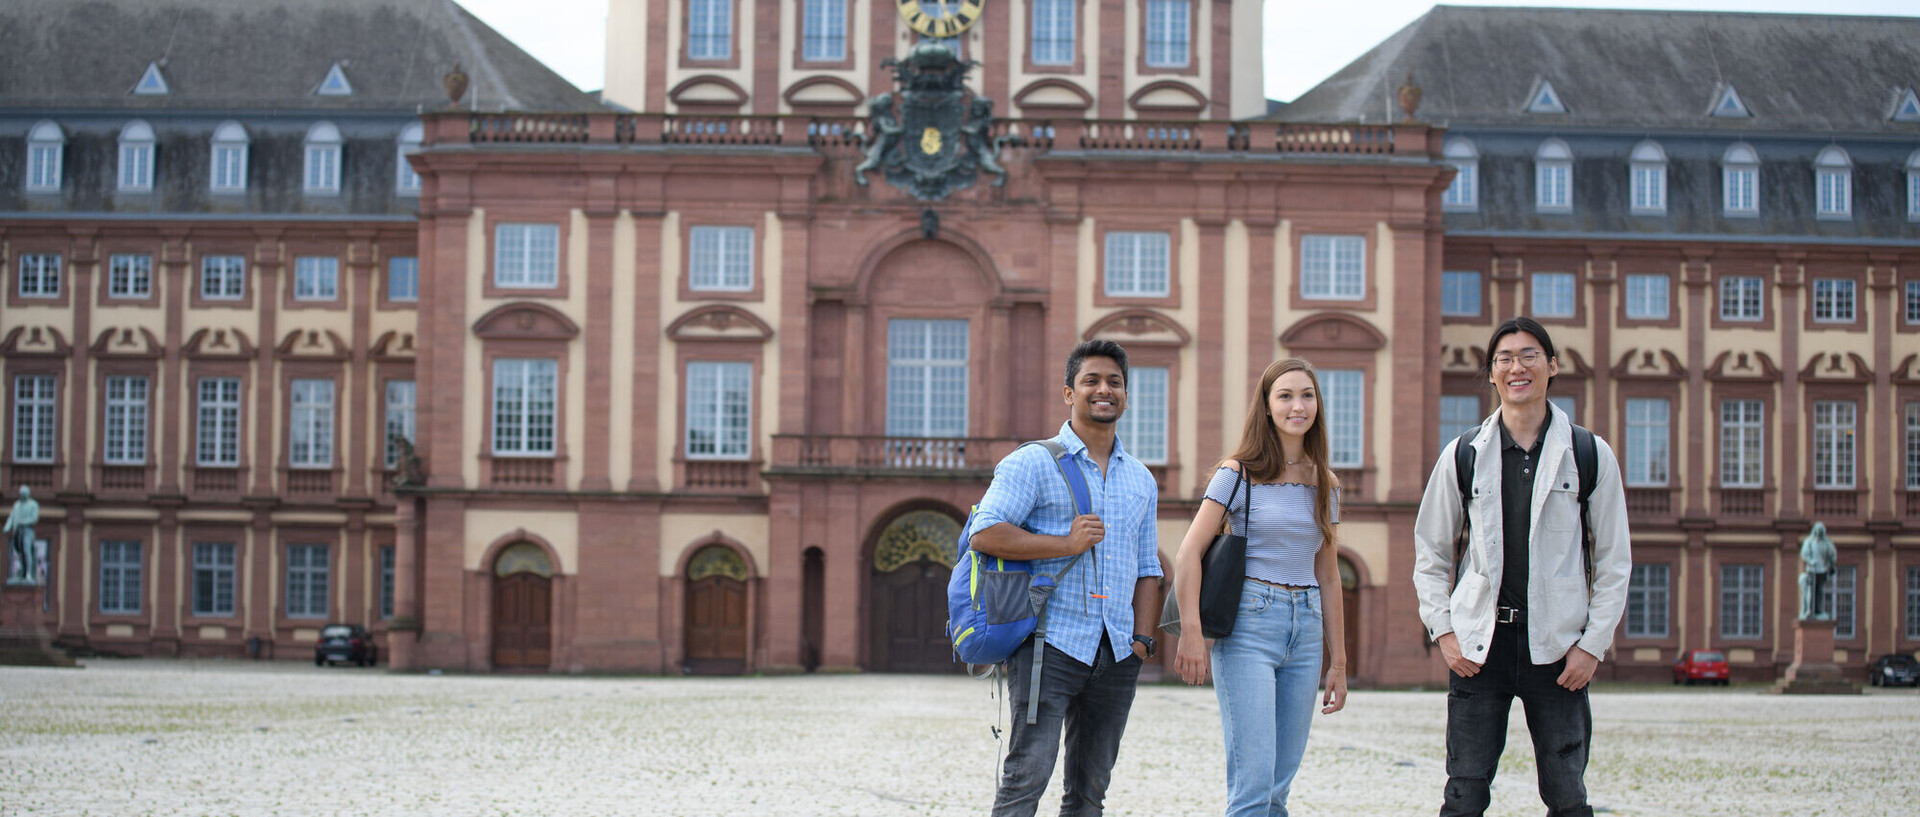 Three students in the castle courtyard look towards the camera. The central building of the palace in the background.